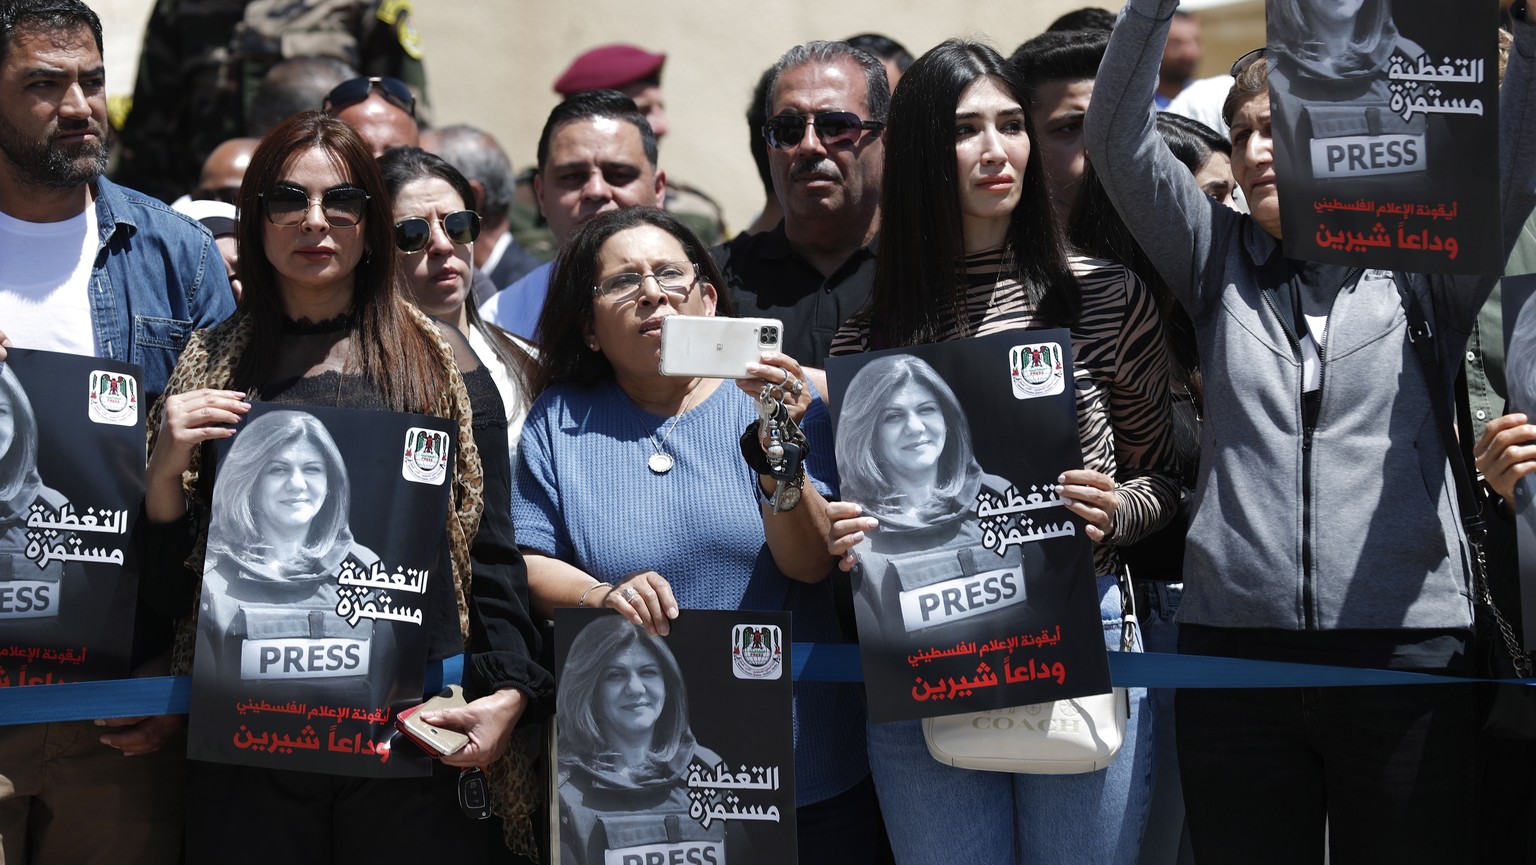 epa09941927 Palestinians attending the official funeral of Al-Jazeera correspondent Shireen Abu Akleh at the headquarters of the Palestinian Authority in the West Bank city of Ramallah, 12 May 2022. A ...